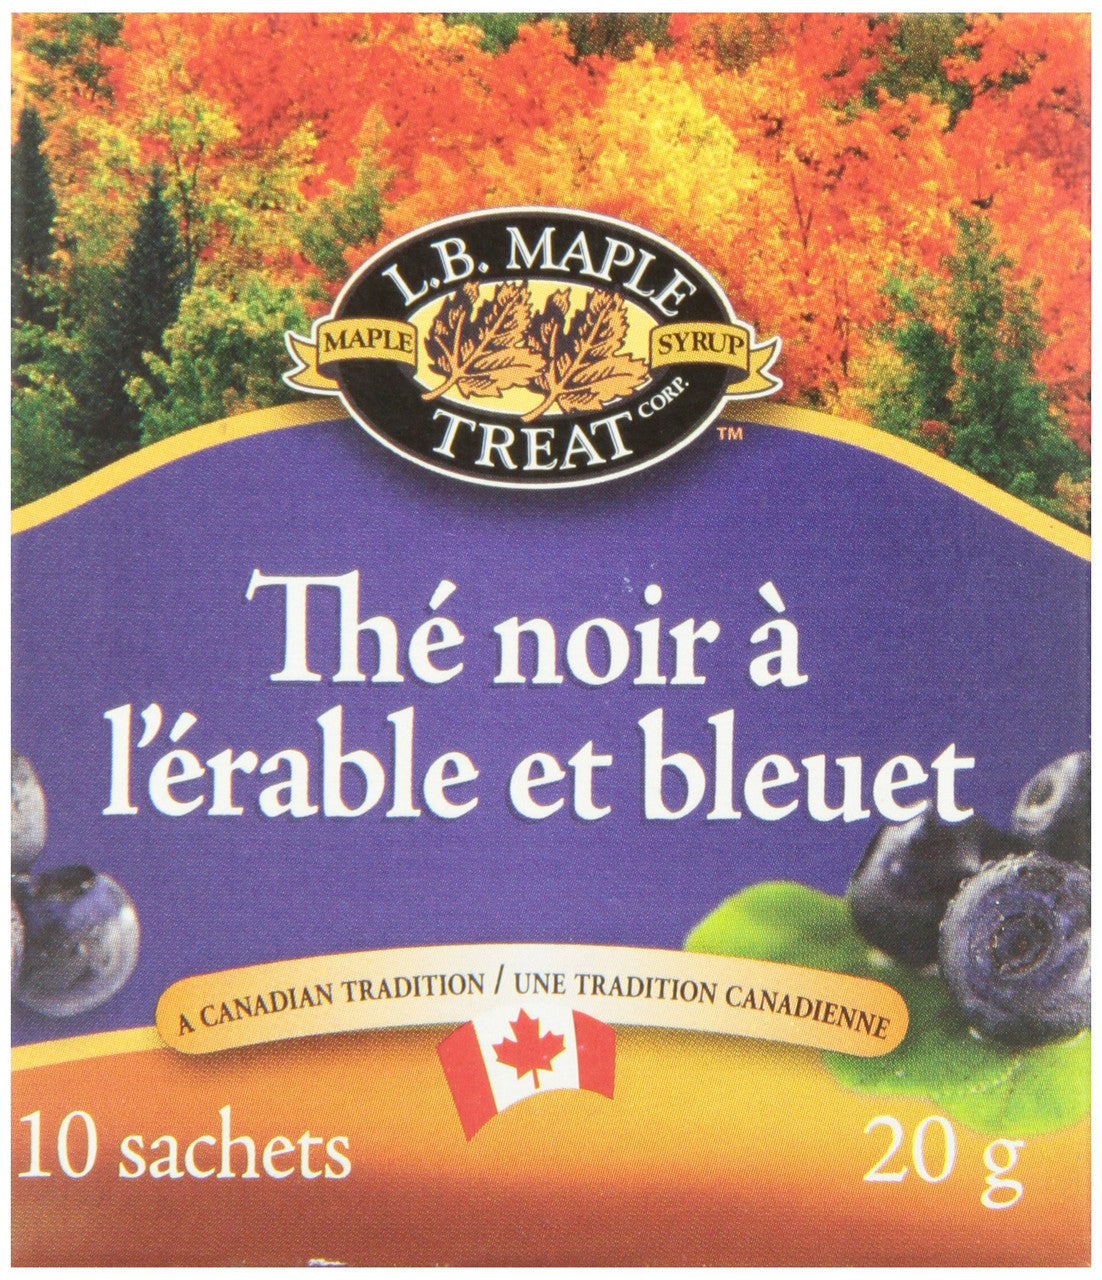 L.B. MAPLE TREAT, Maple Blueberry Herbal Tea,  20g, {Imported from Canada}